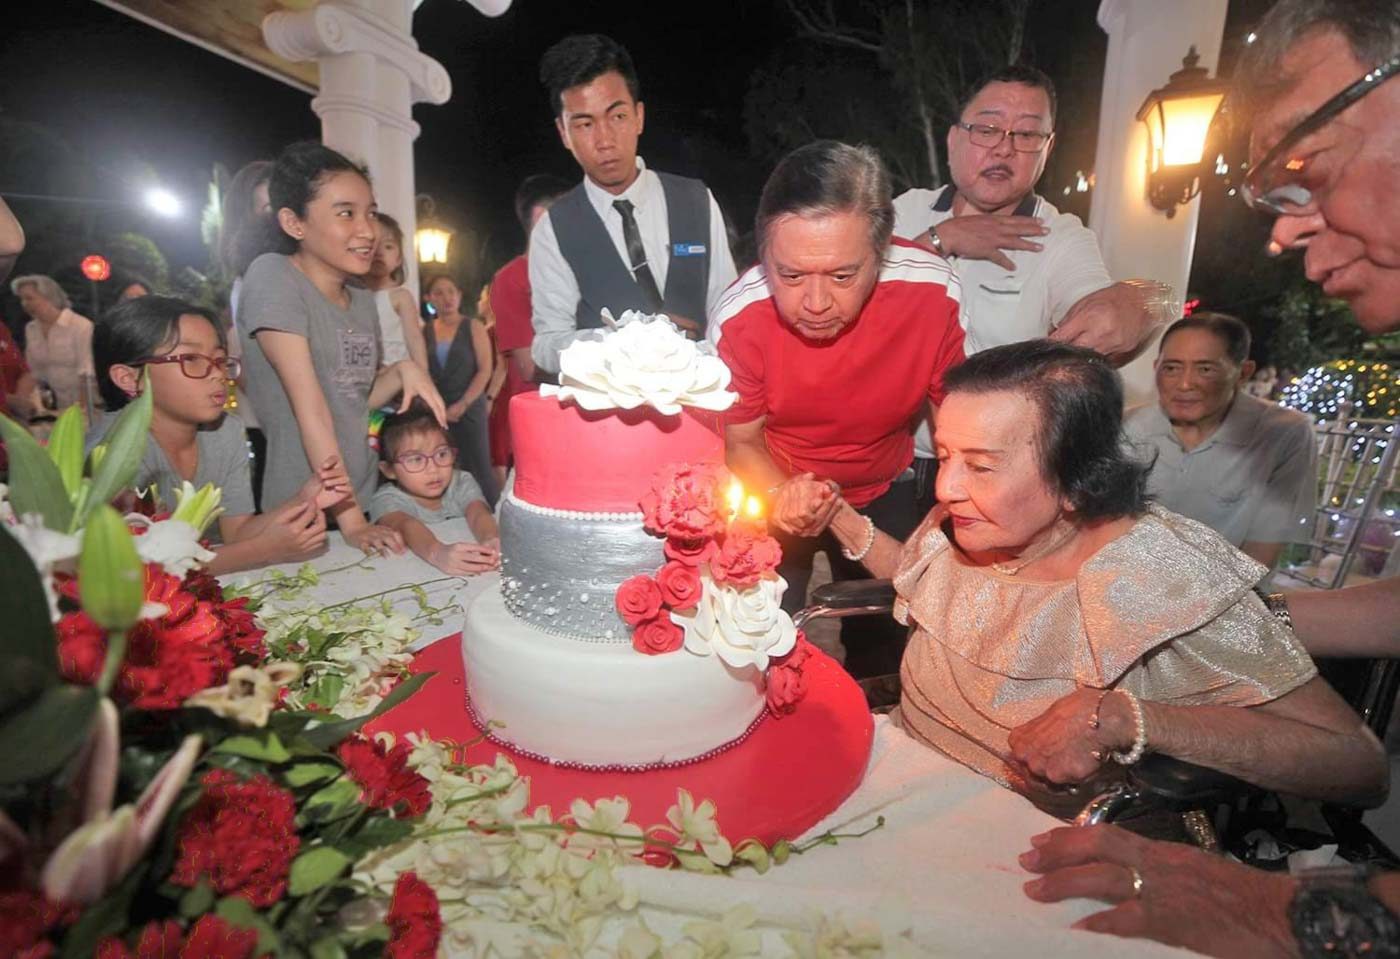 Minervina Singson, composer of Candon Hymn and patron of music scholars, turns 100